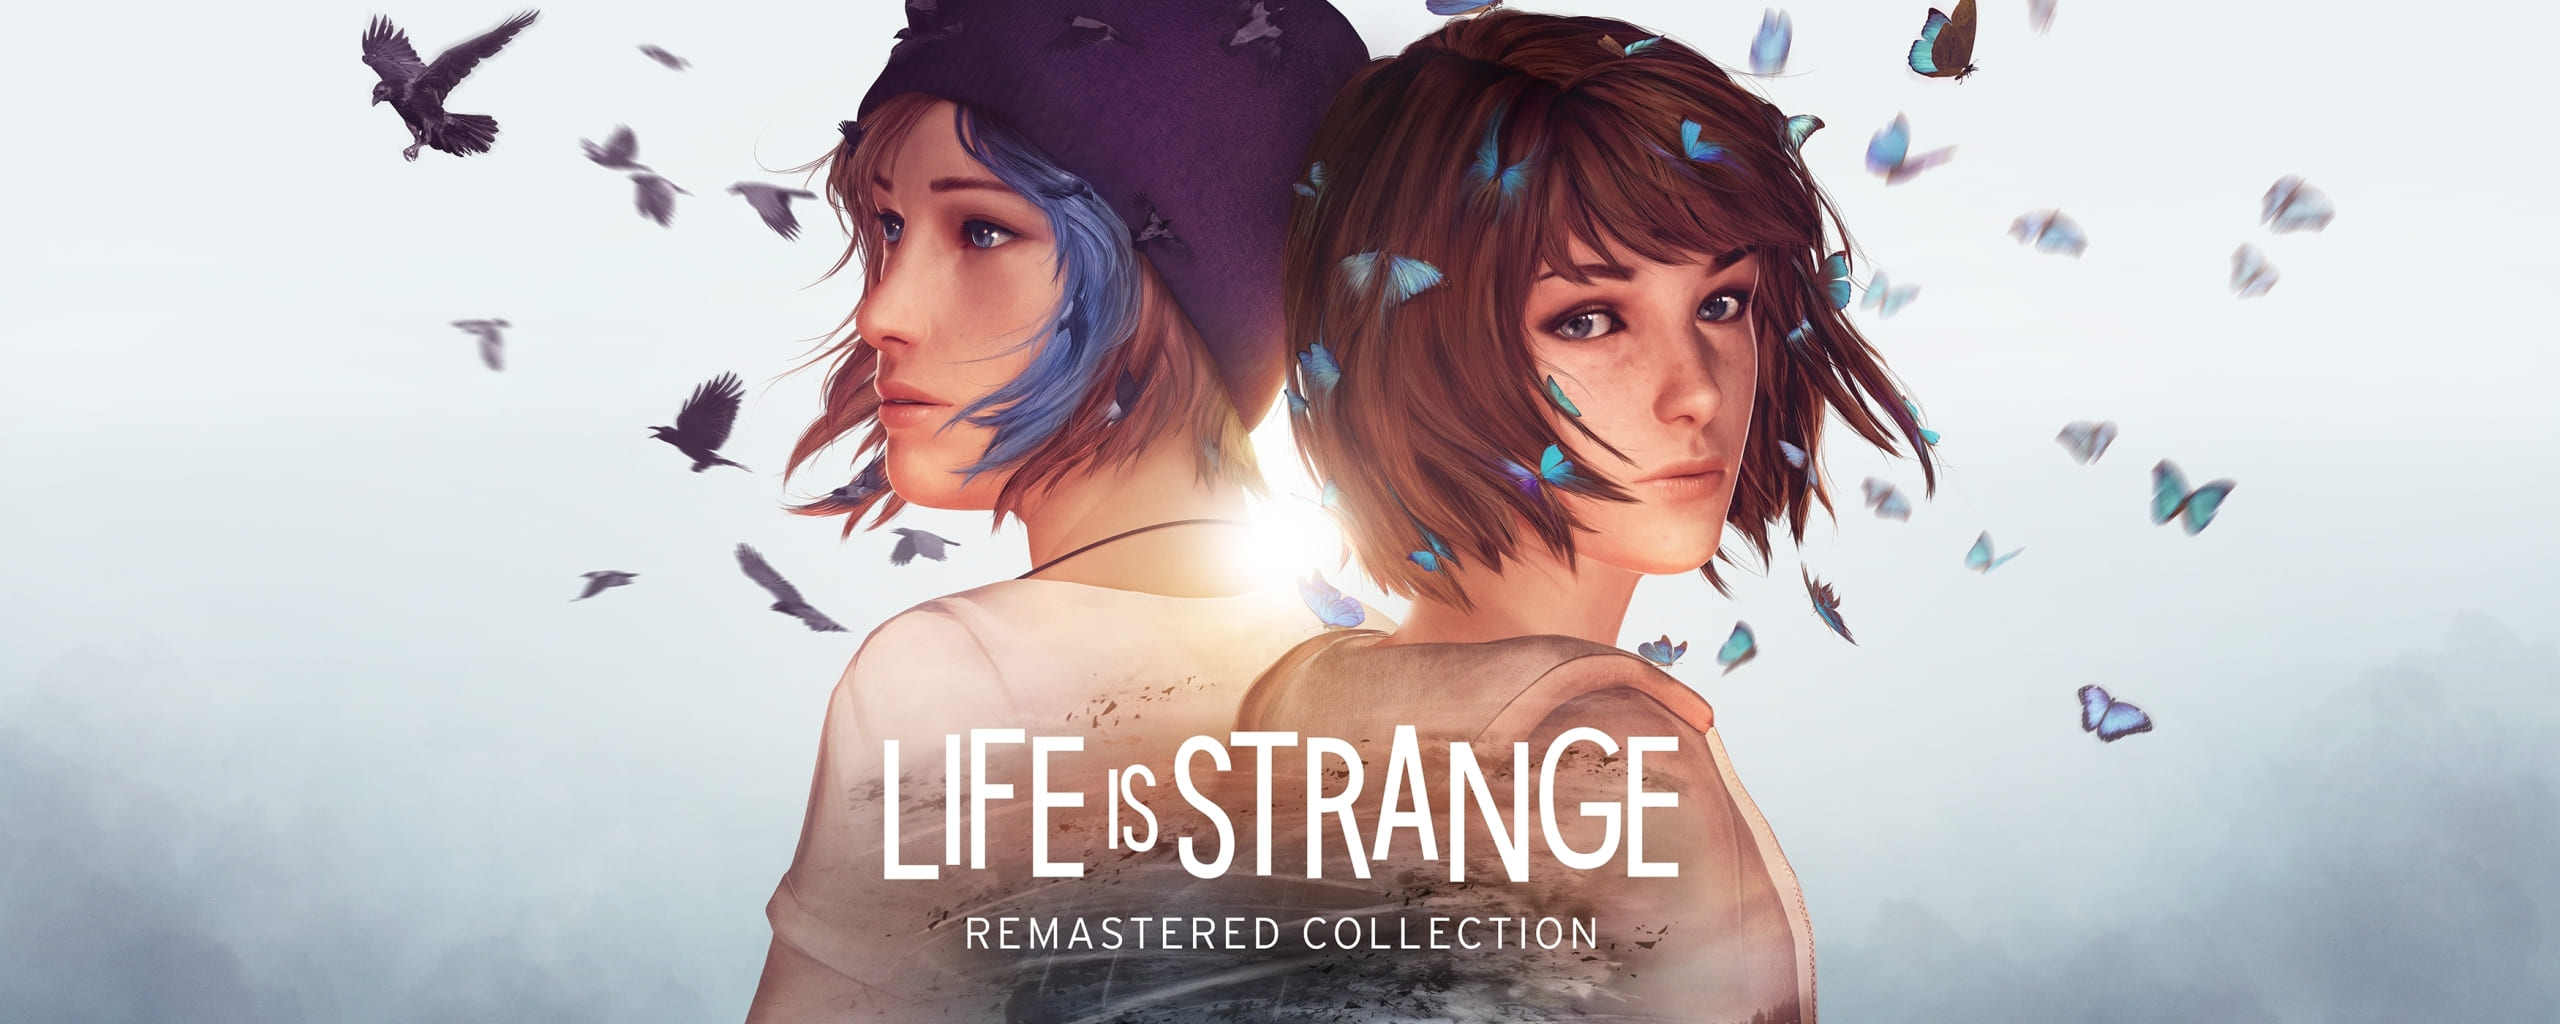 Life is strange remastered Collection